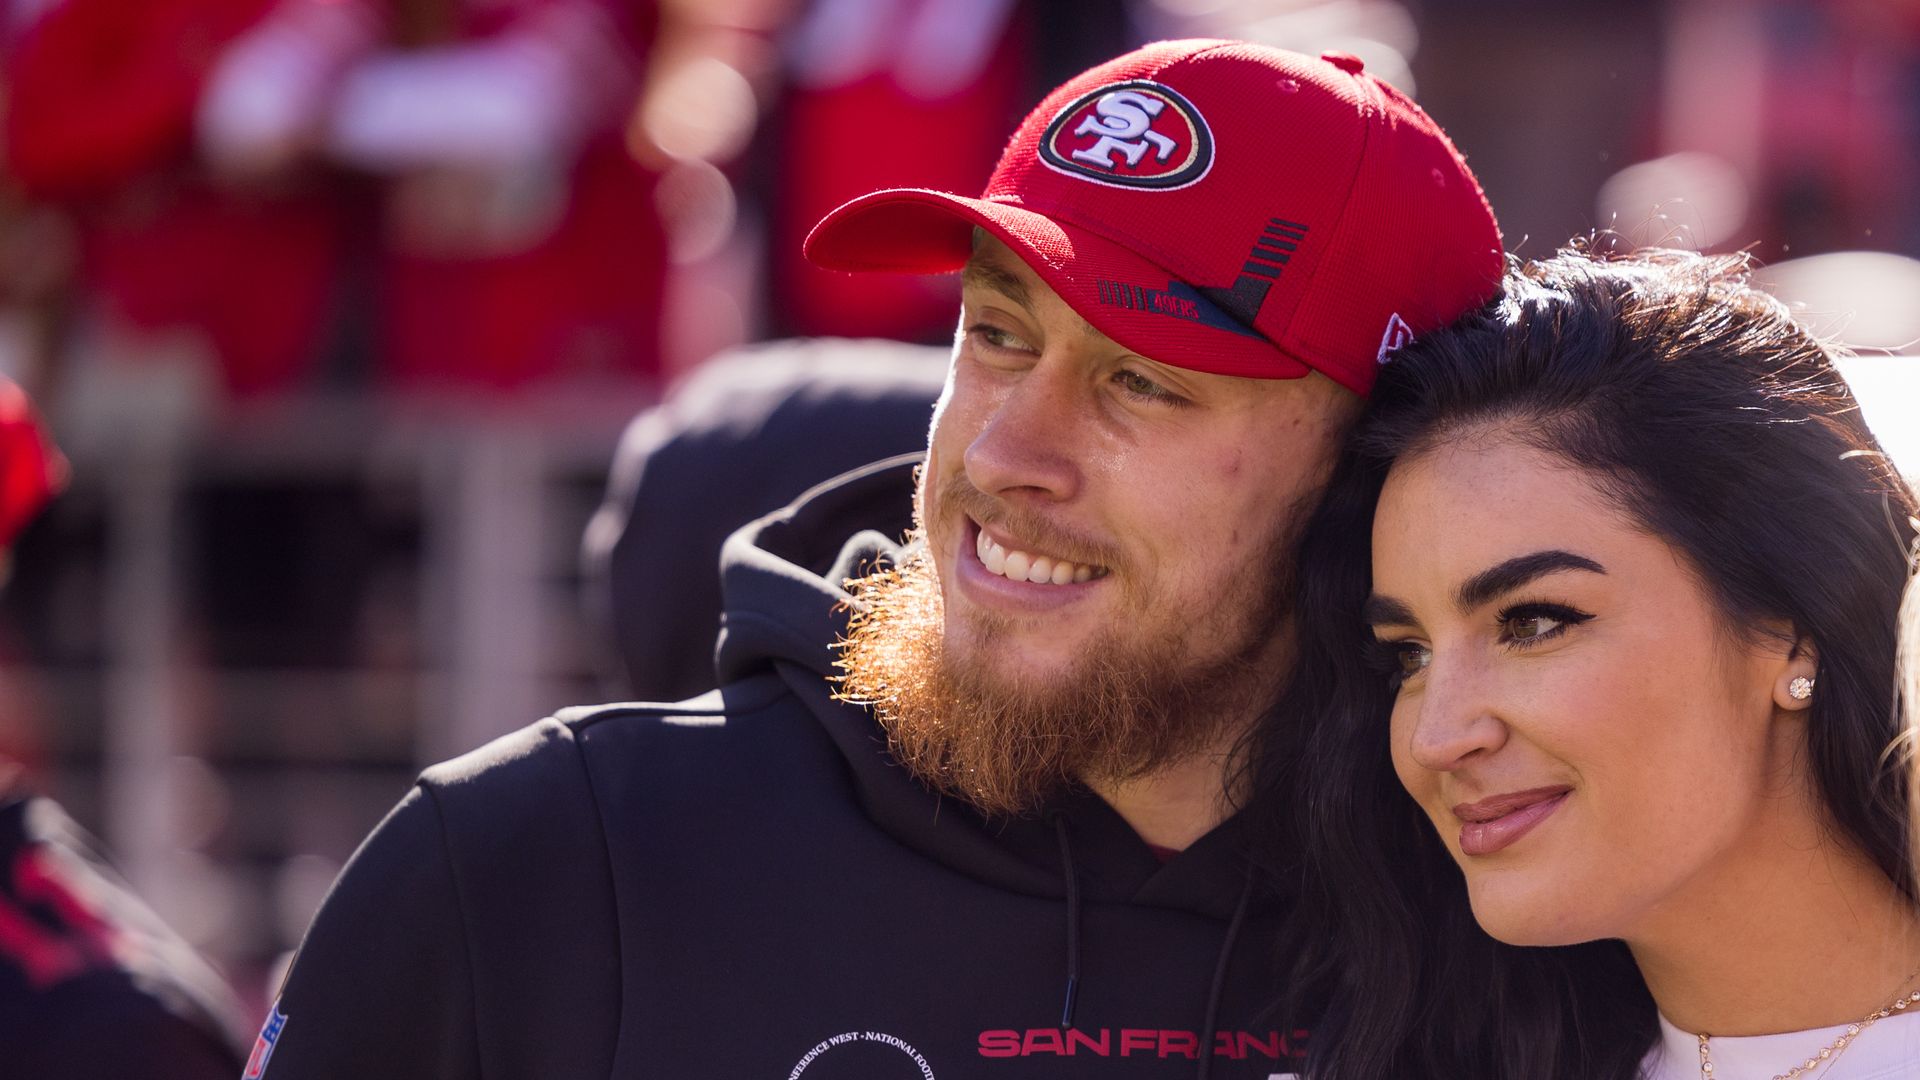 San Francisco 49ers Tight End George Kittle (85) poses with his wife, Claire, before the NFL pro football game between the Houston Texans and San Francisco 49ers on January 2, 2022 at Levis Stadium in Santa Clara, CA.